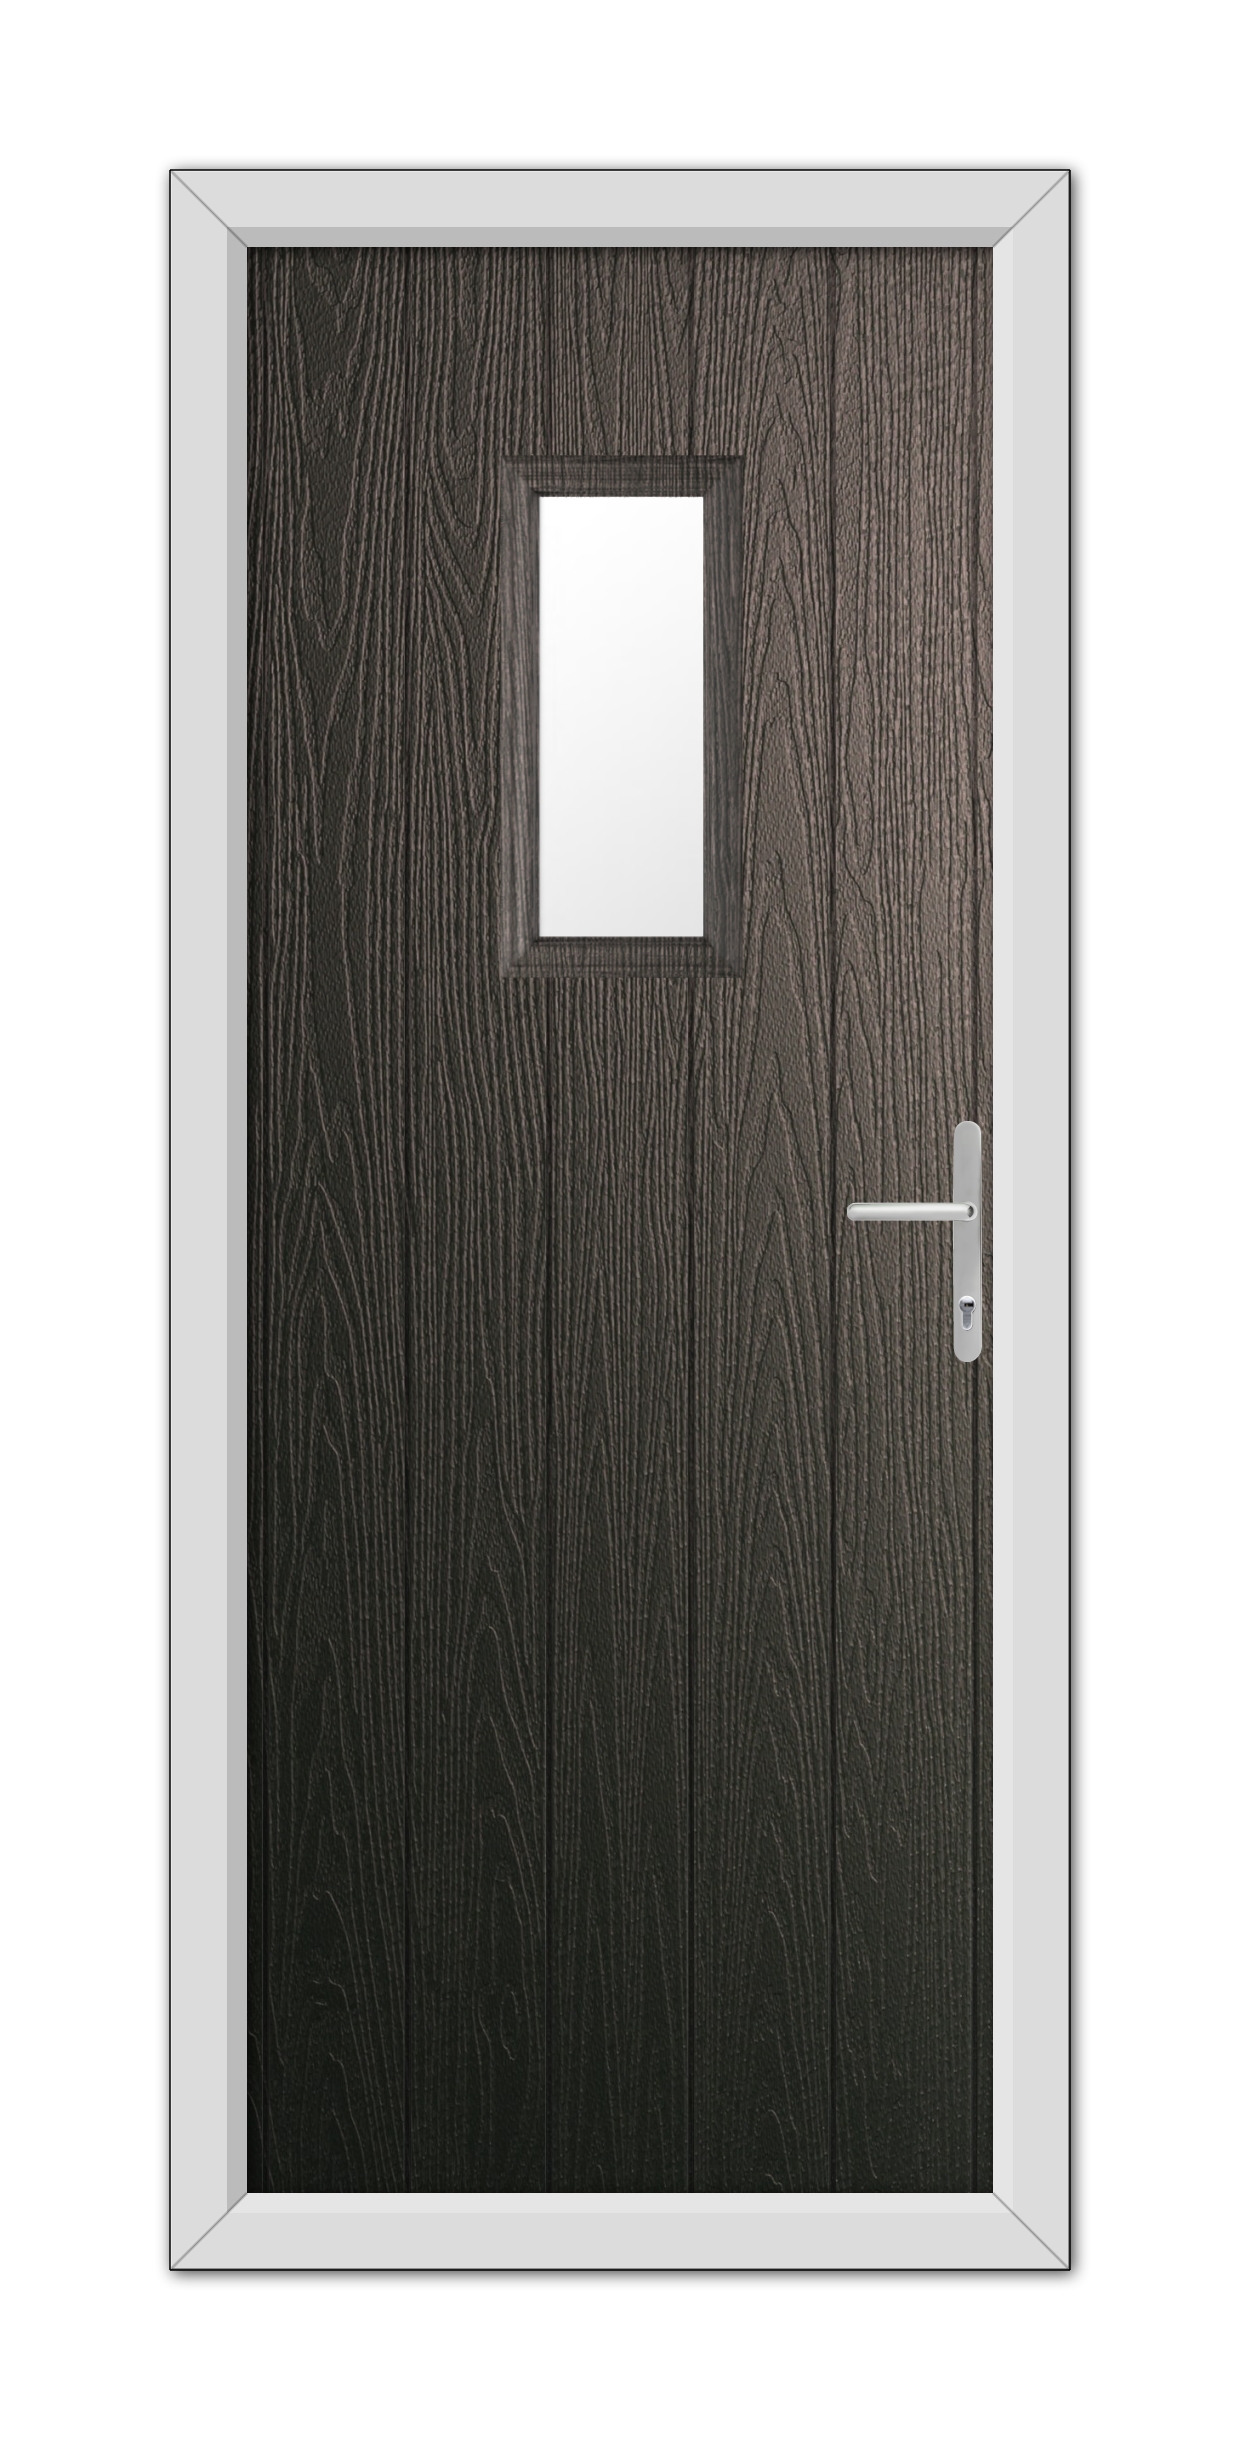 A Schwarzbraun Somerset Composite Door 48mm Timber Core with a small rectangular window, framed in white, featuring a metal handle on the right side.